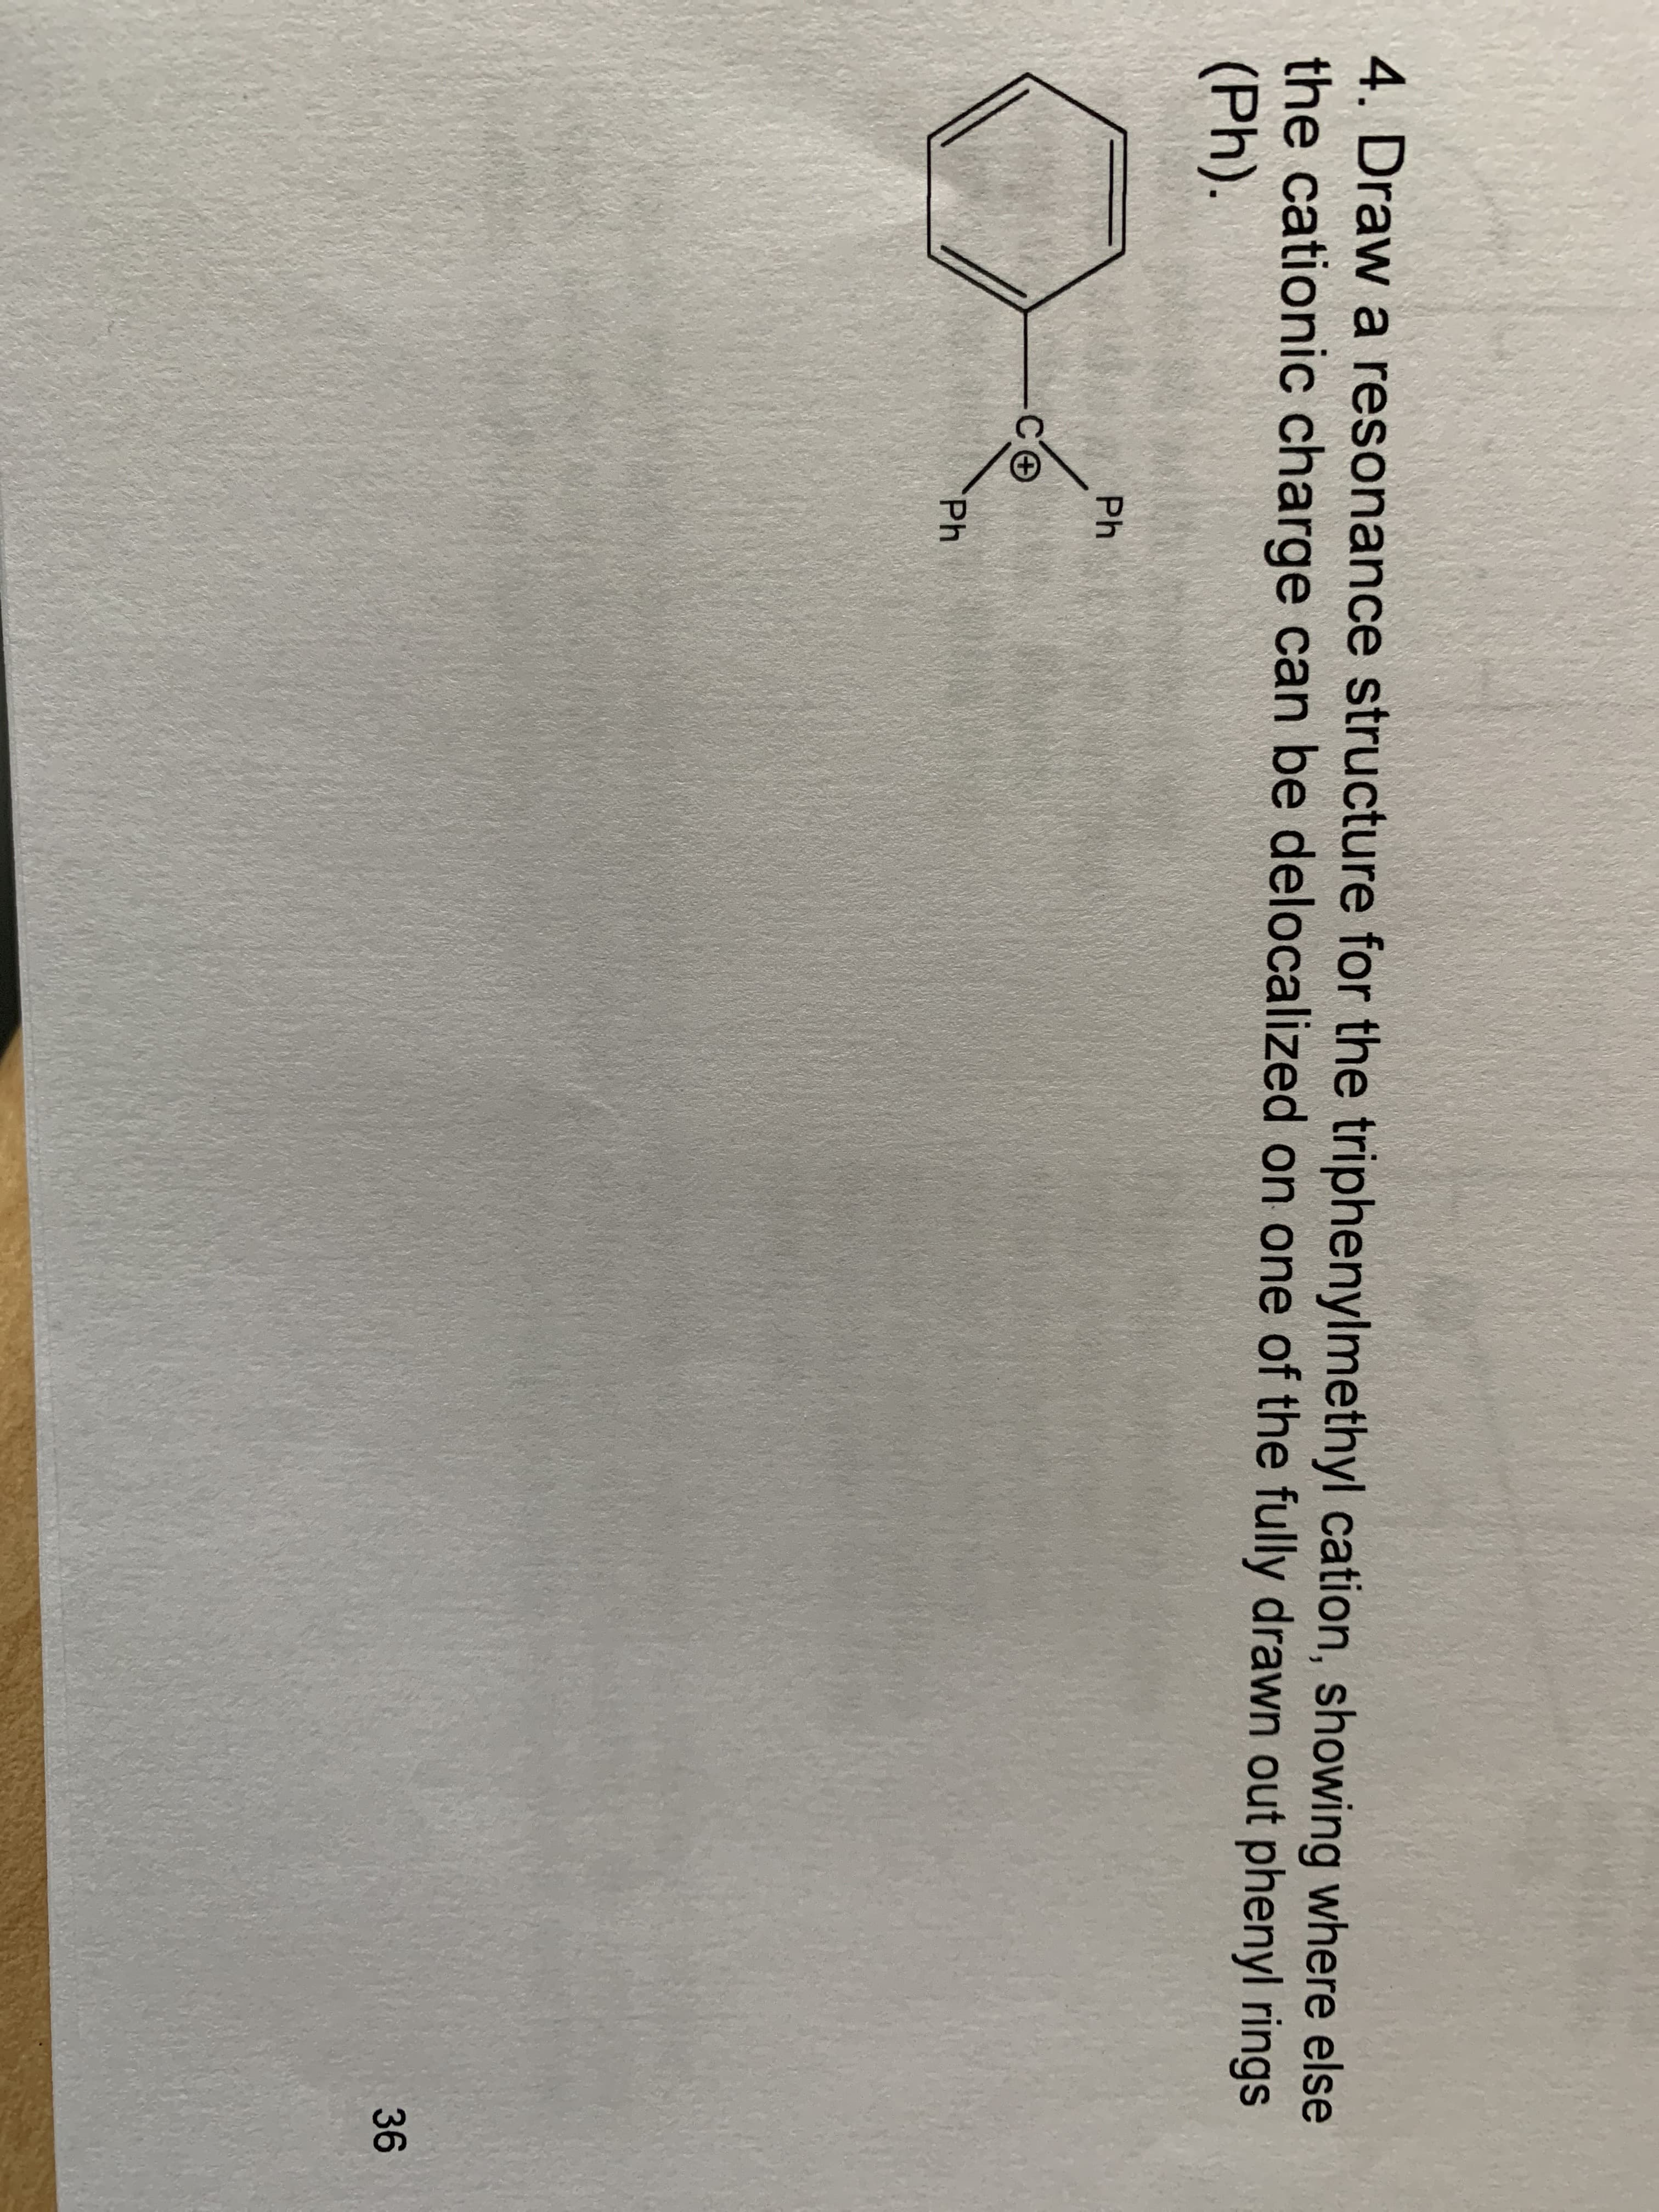 4. Draw a resonance structure for the triphenylmethyl cation, showing where else
the cationic charge can be delocalized on one of the fully drawn out phenyl rings
(Ph).
Ph
Ph
36
